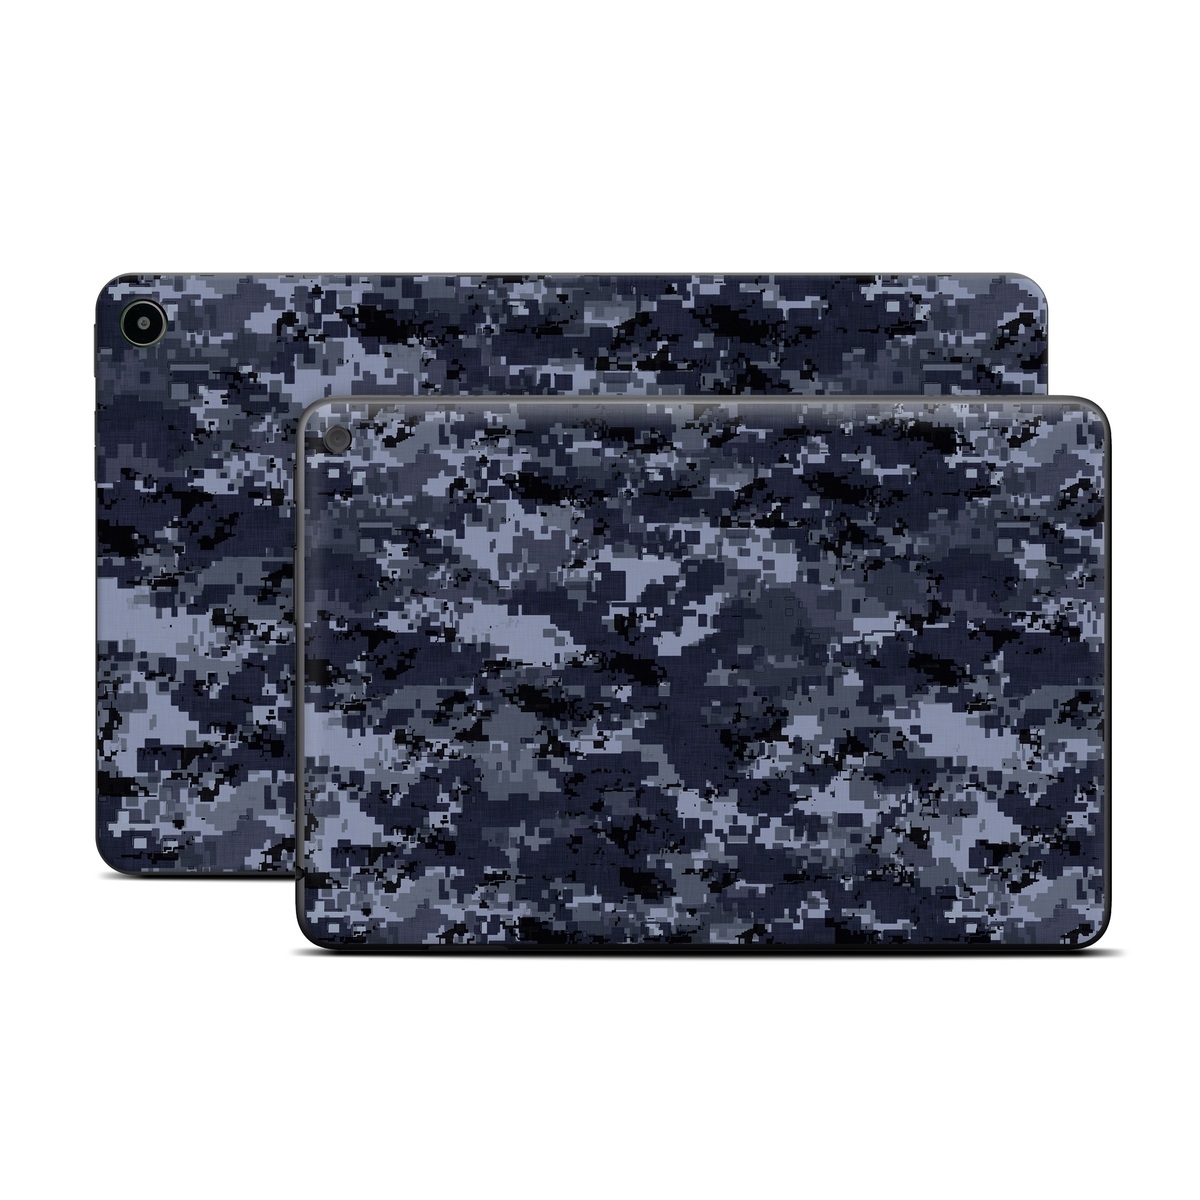 Amazon Fire Tablet Series Skin Skin design of Military camouflage, Black, Pattern, Blue, Camouflage, Design, Uniform, Textile, Black-and-white, Space, with black, gray, blue colors